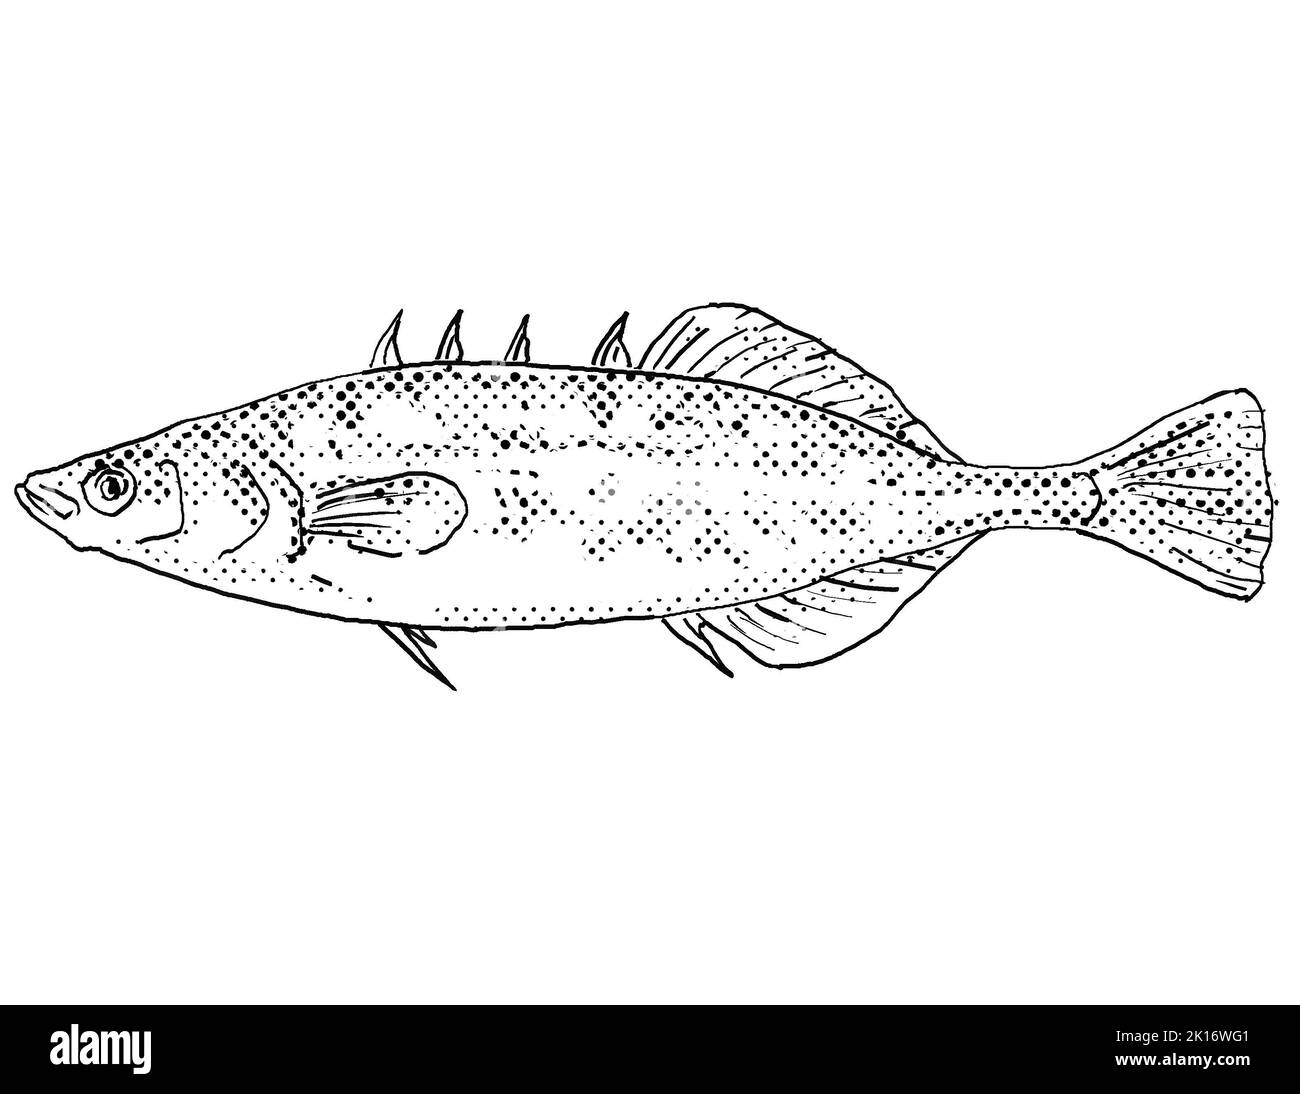 Cartoon style line drawing of a brook stickleback or Culaea inconstans  freshwater fish found in North America with halftone dots on isolated backgrou Stock Photo